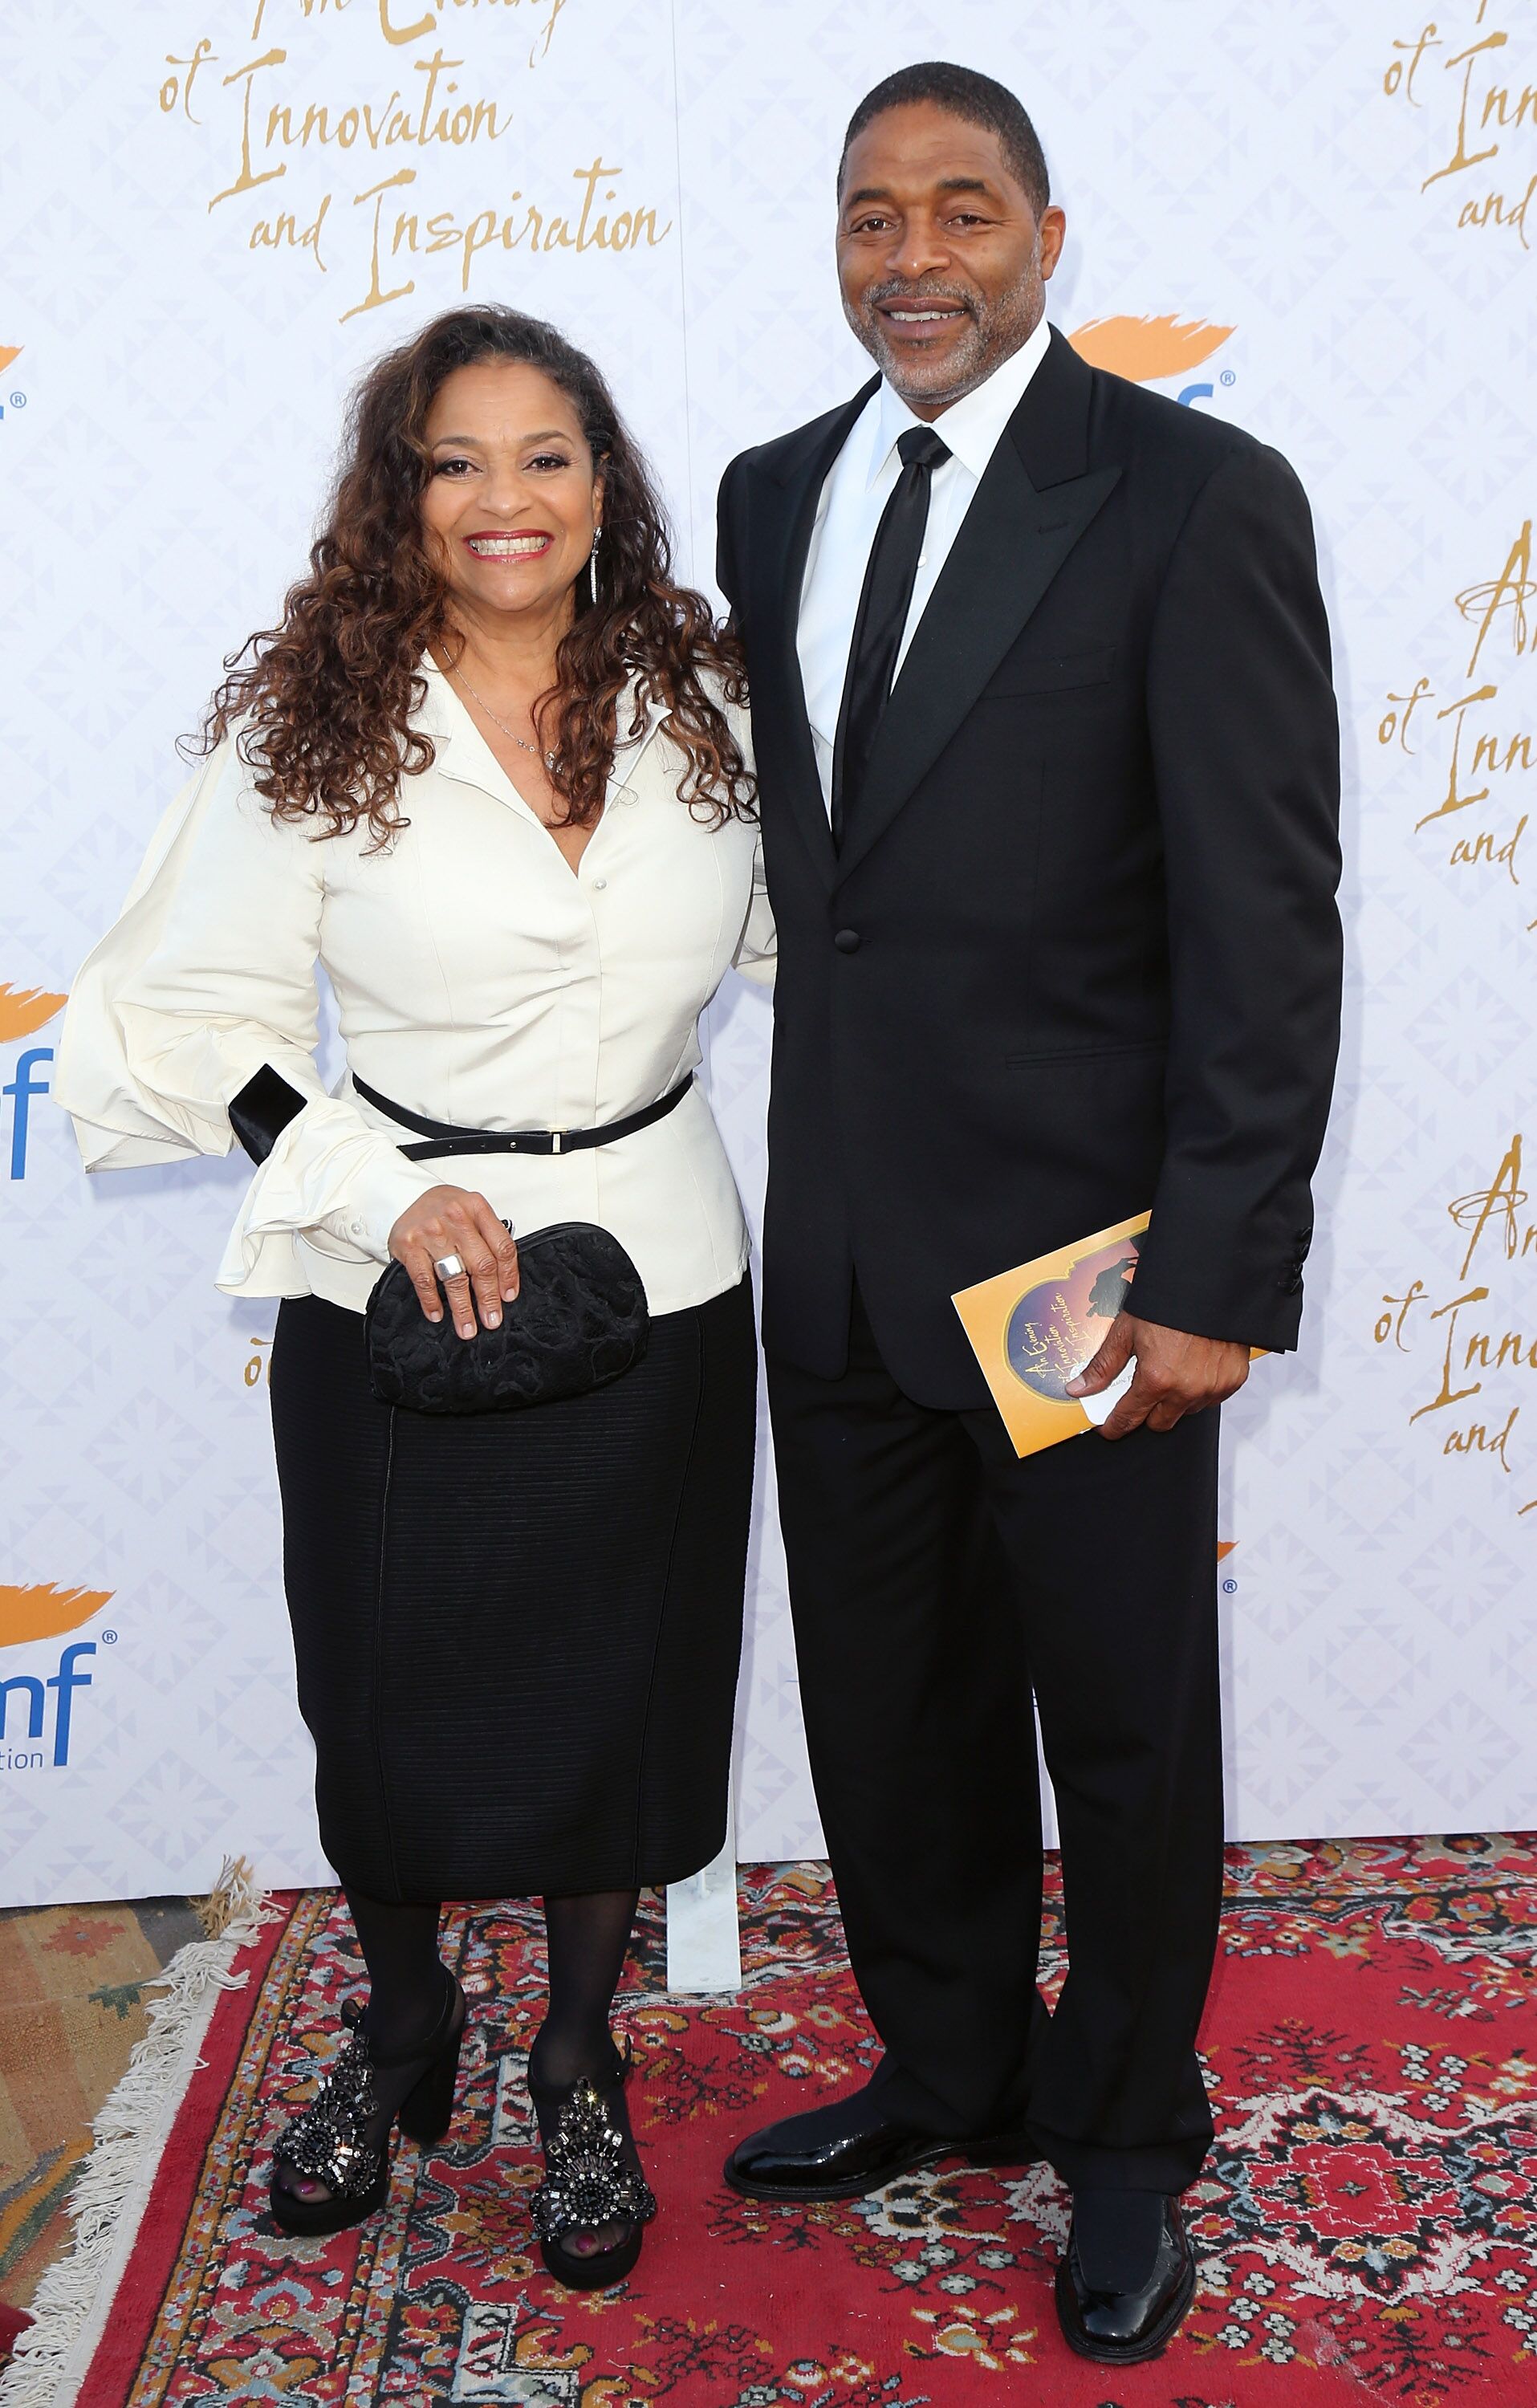  Actress Debbie Allen and husband Norm Nixon attend the 10th Annual Alfred Mann Foundation Gala in the Robinsons-May Lot on October 13, 2013 in Beverly Hills, California | Photo: Getty Images